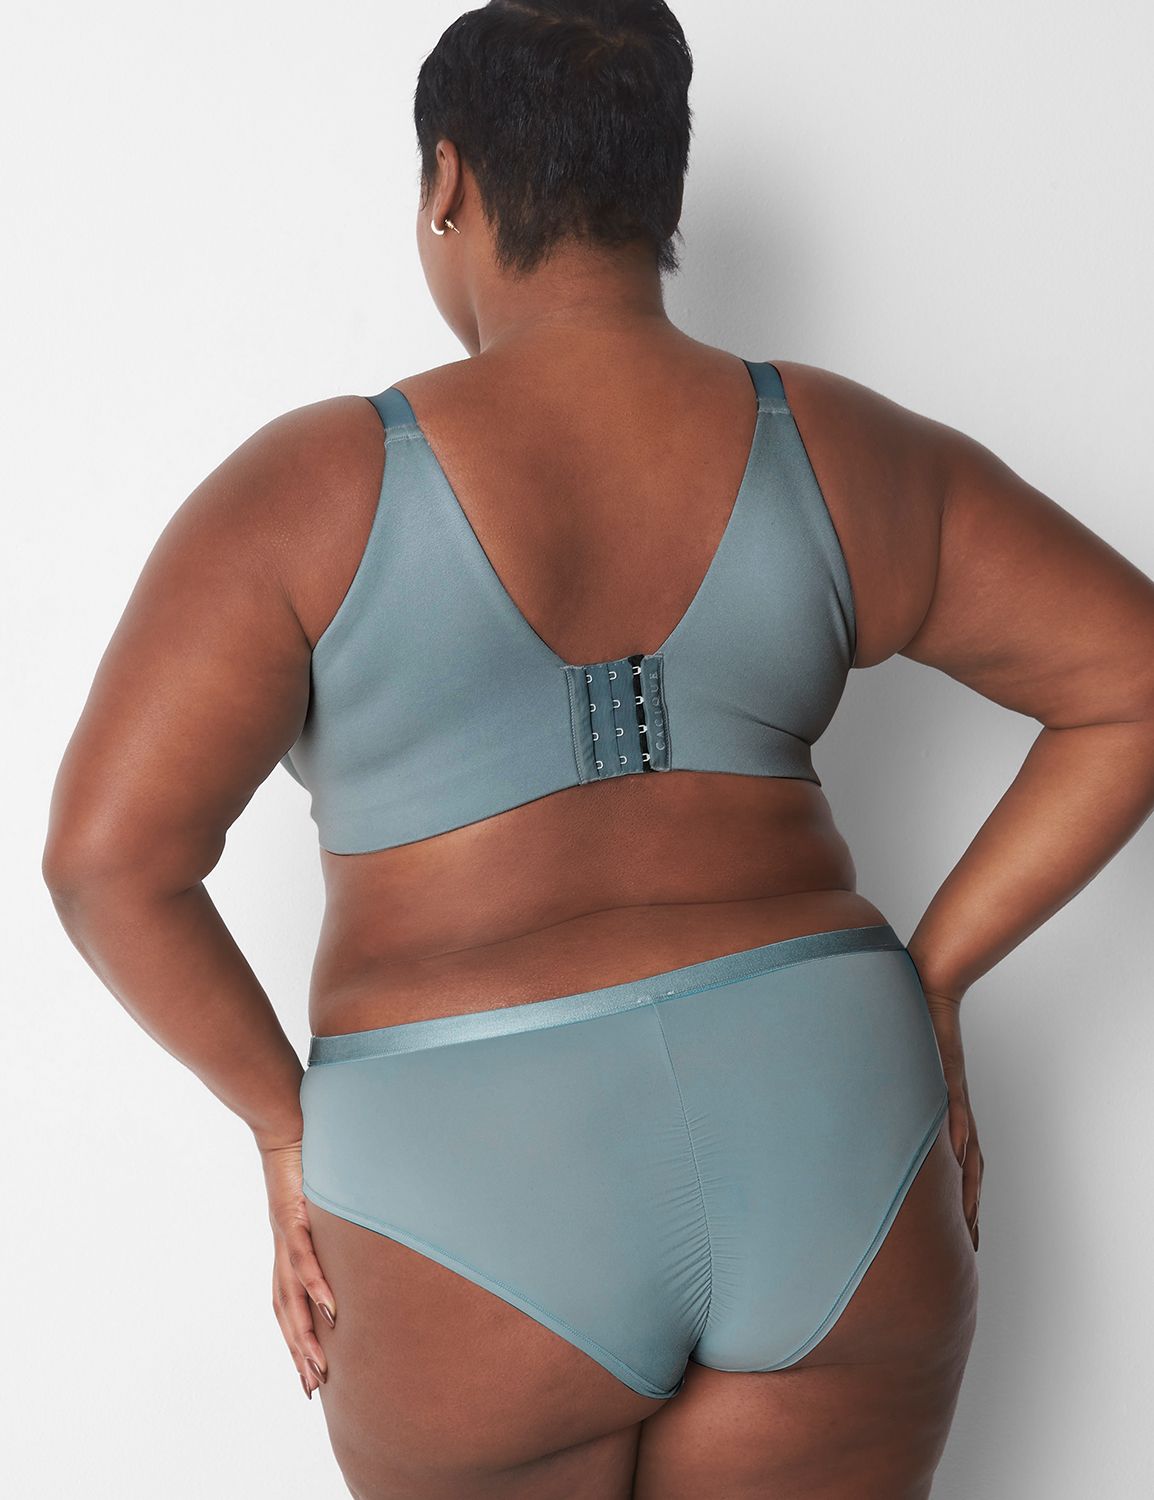 Lane Bryant - Kicking off this V-Day weekend with $35 full-price